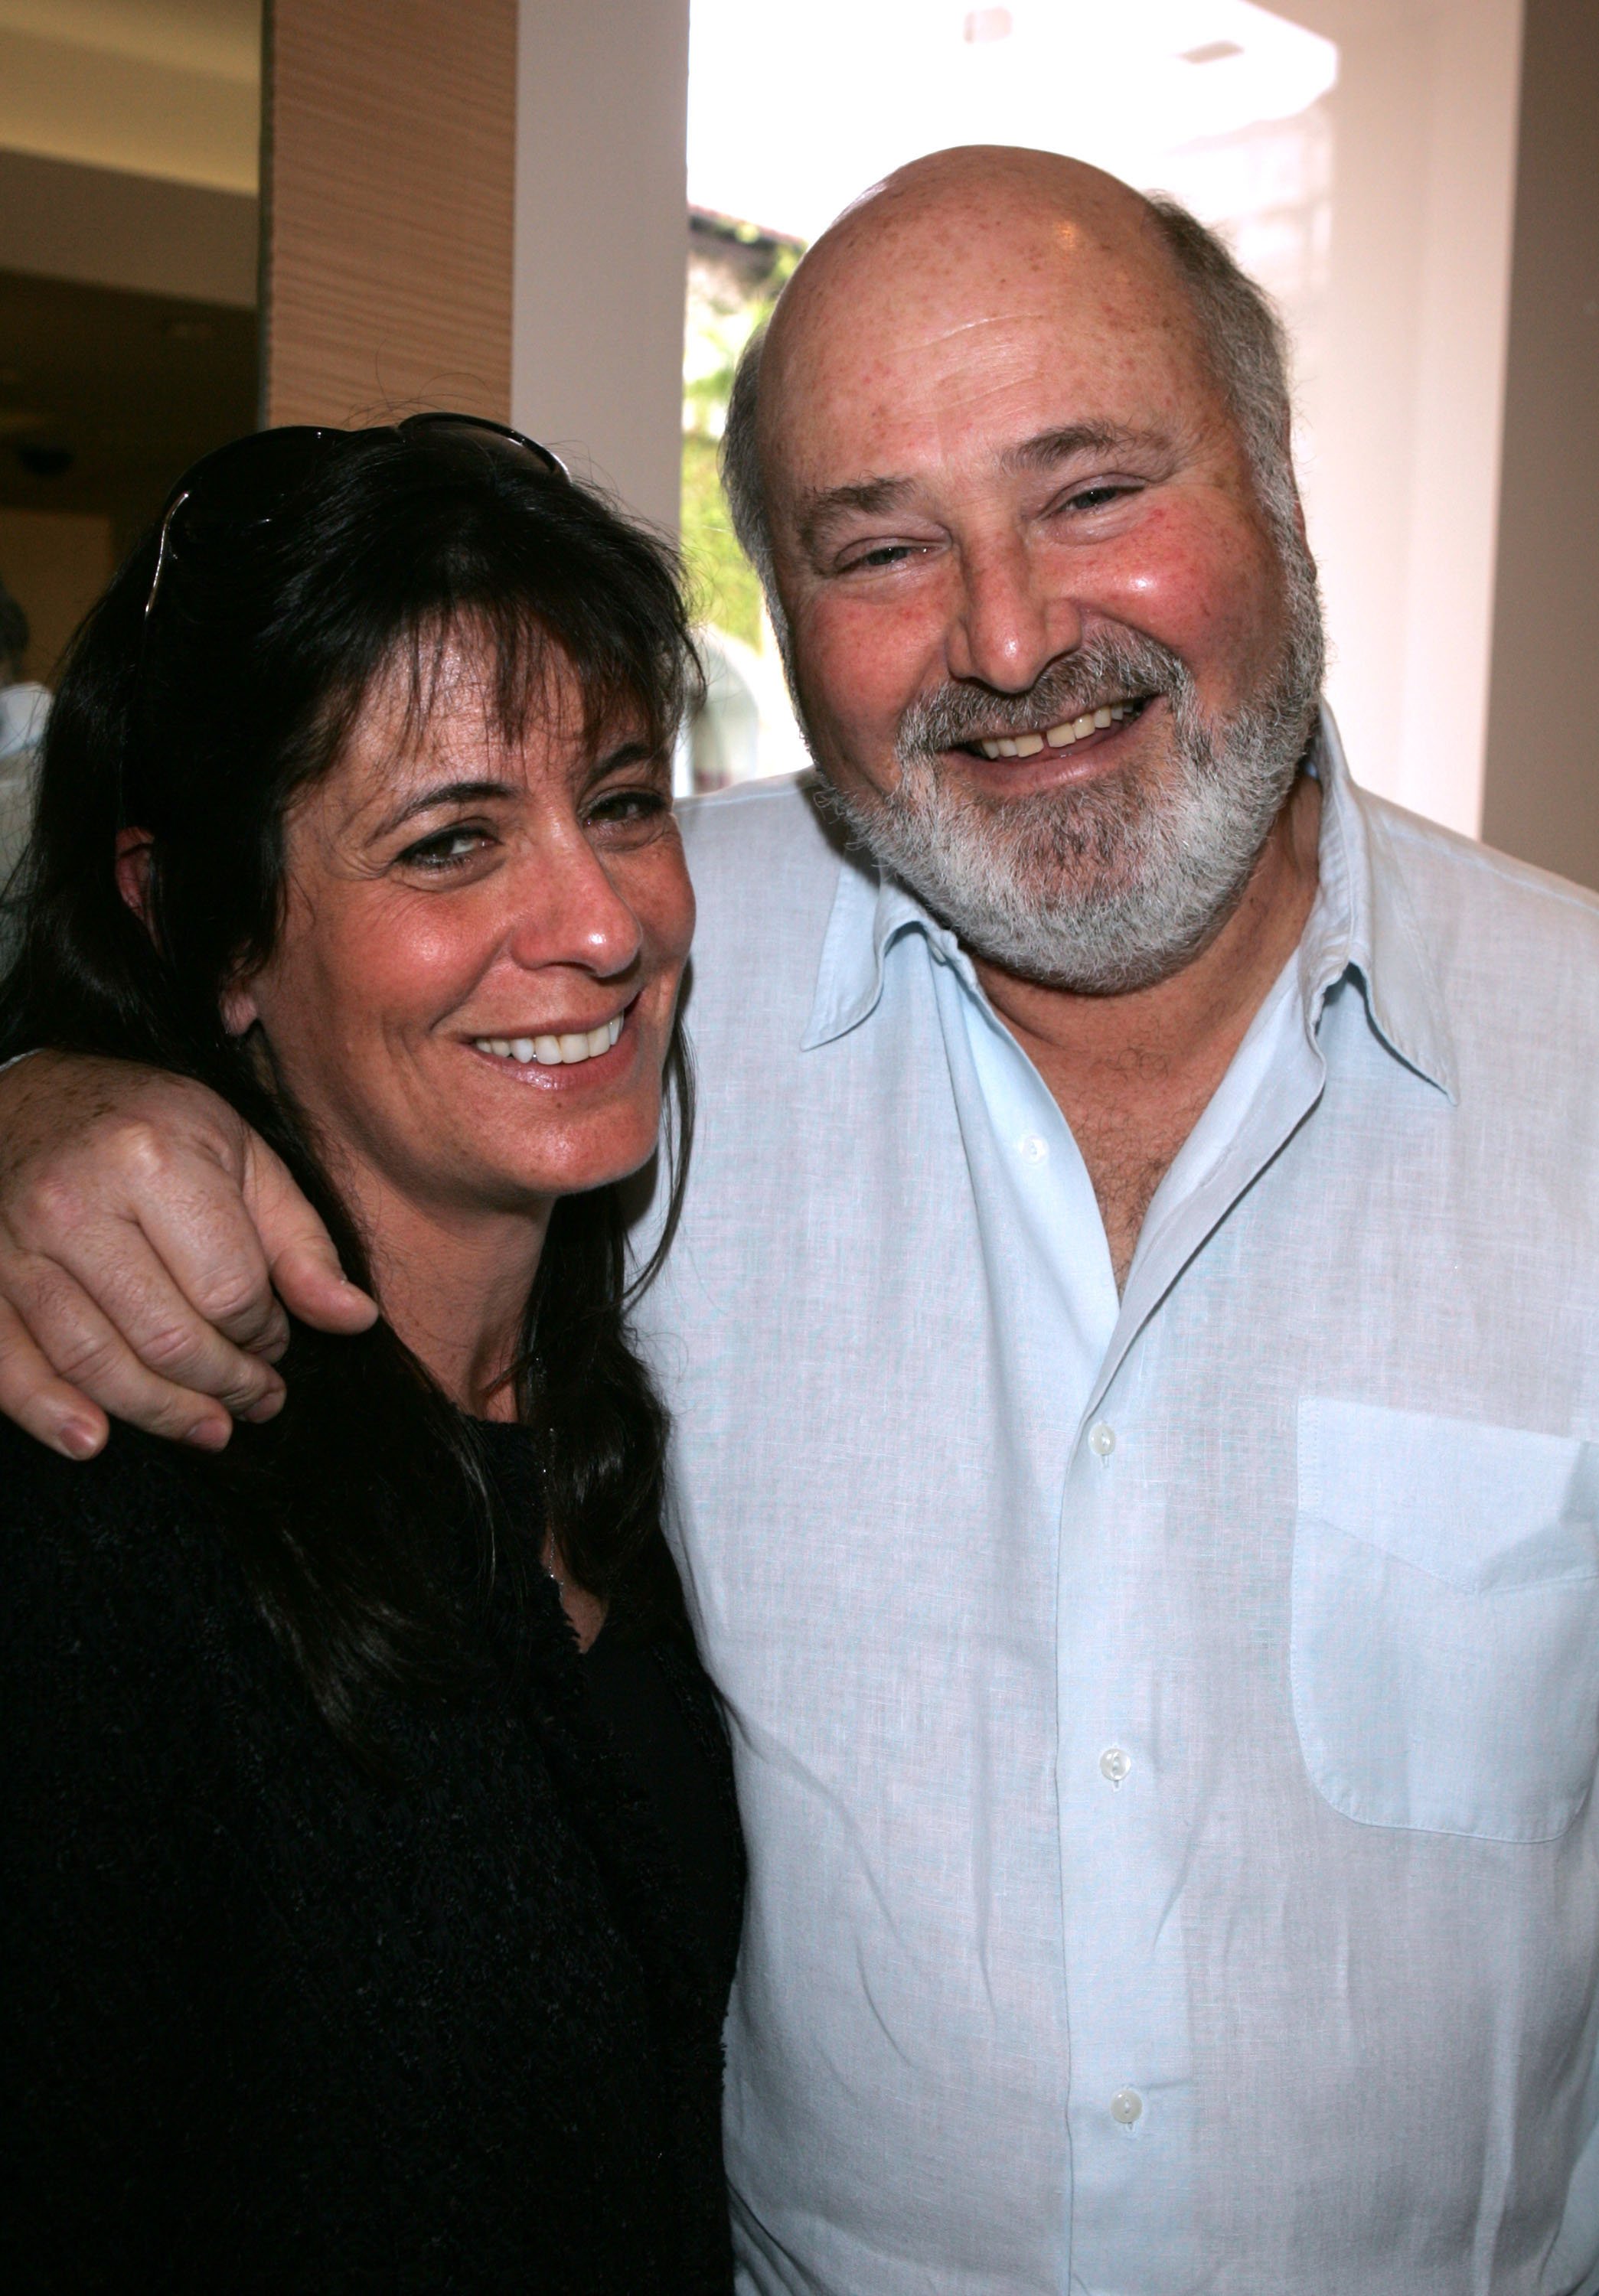 Rob Reiner and Michele Singer in California in 2005 | Source: Getty Images